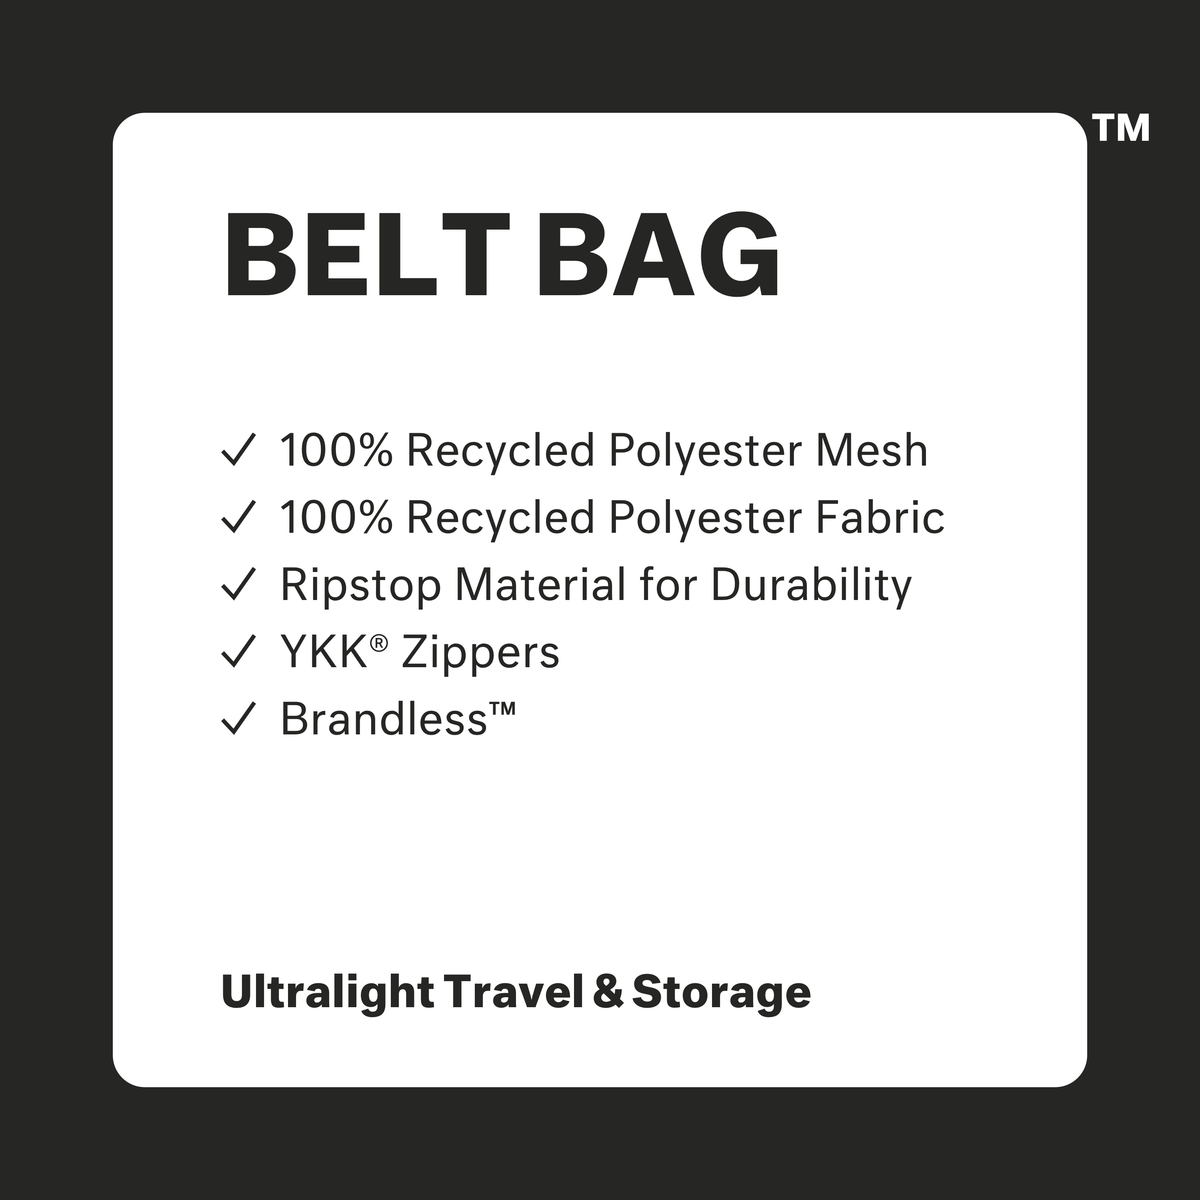 Belt bag: 100% recycled polyester mesh, 100% recycled polyester fabric, ripstop material for durability, ykk zippers, brandless. Ultralight travel and storage.